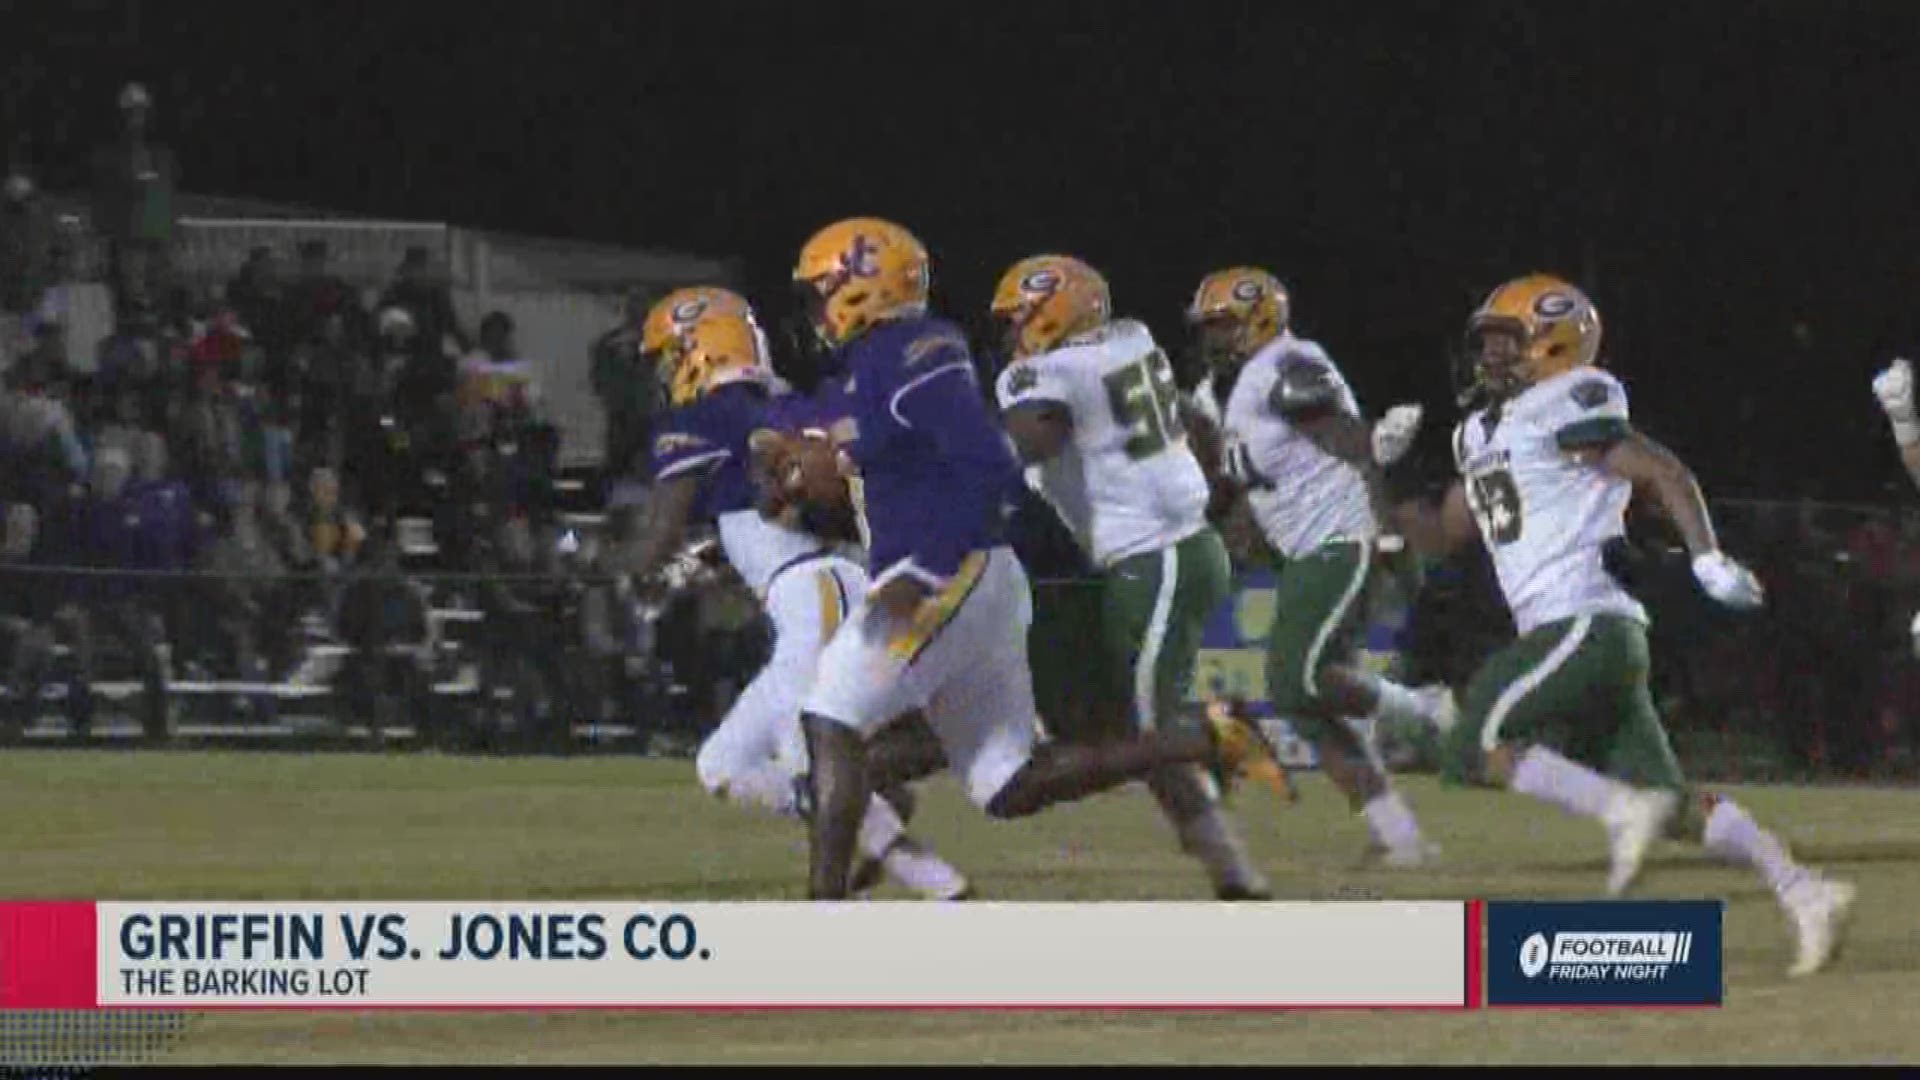 Here are your 2019 Georgia high school football highlights from Football Friday Night.